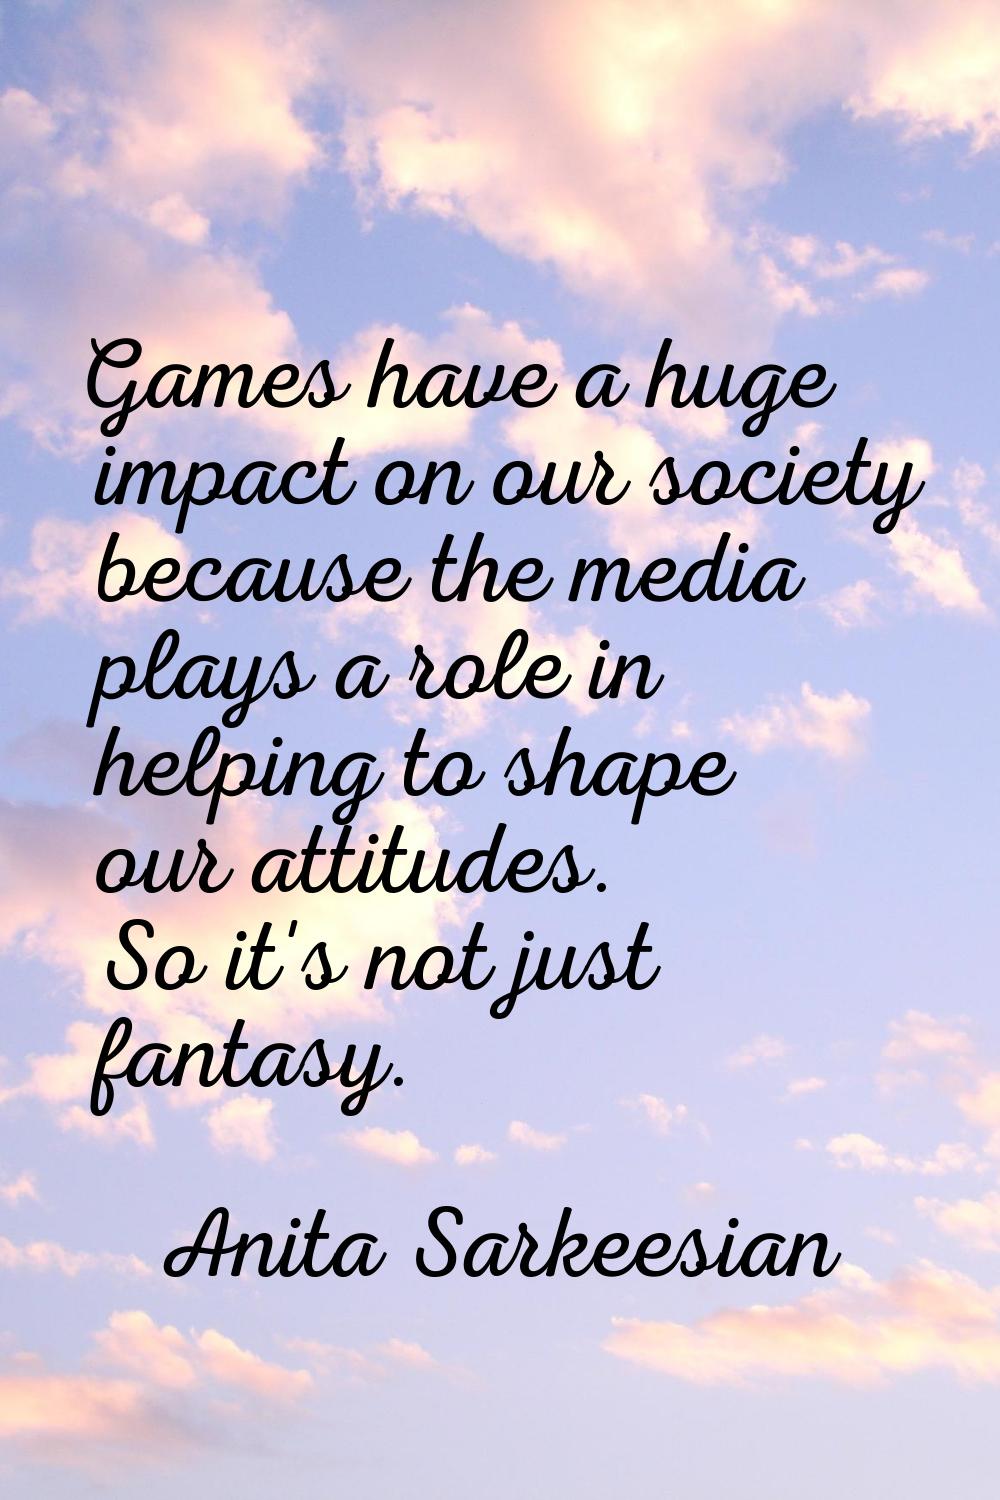 Games have a huge impact on our society because the media plays a role in helping to shape our atti